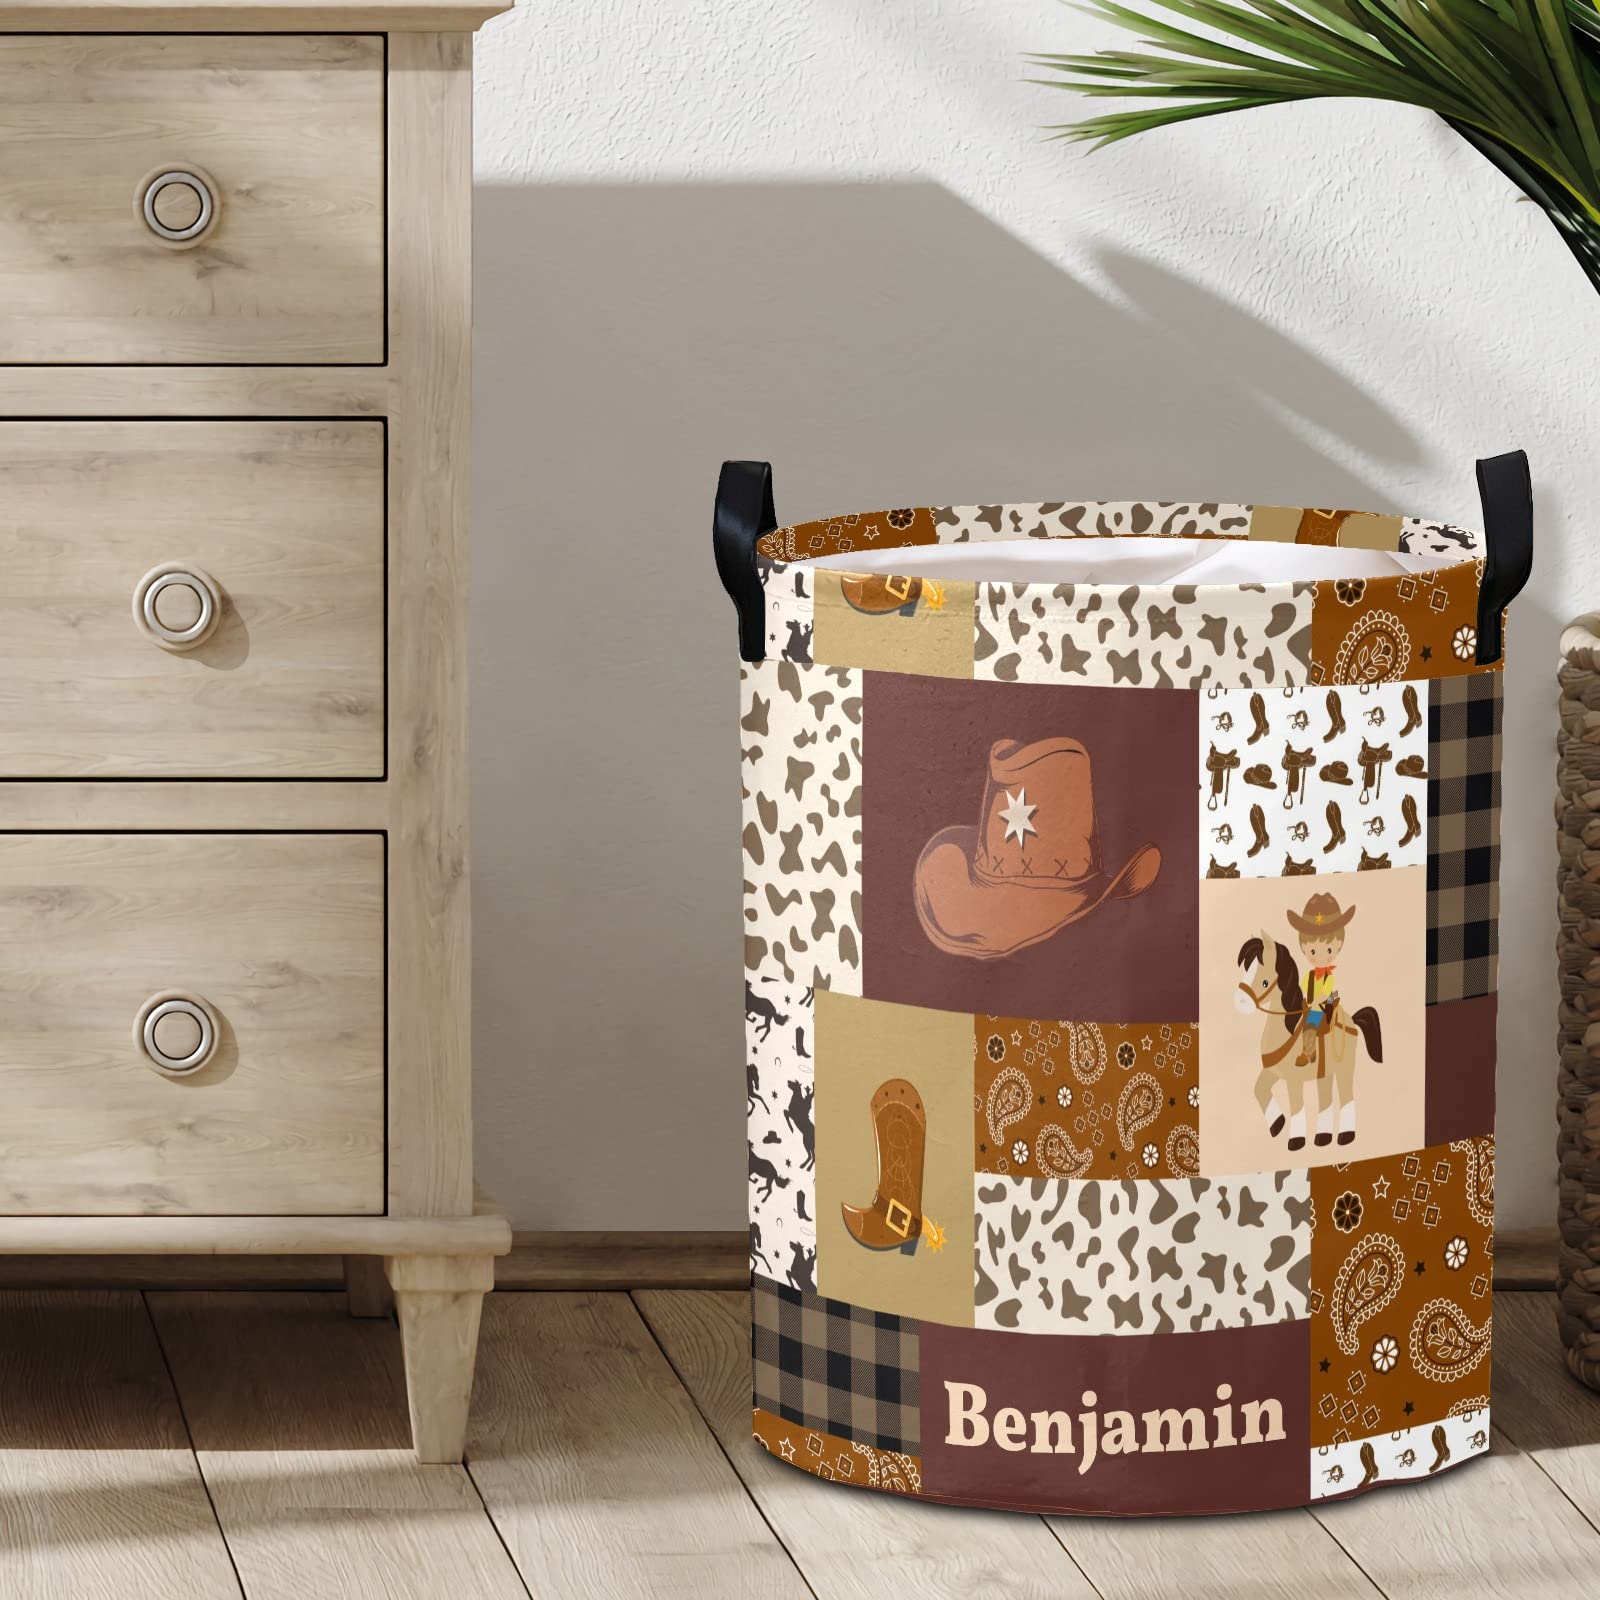 Personalized Laundry Basket Hamper,Cowboy Quilt,Collapsible Storage Baskets with Handles for Kids Room,Clothes, Nursery Decor